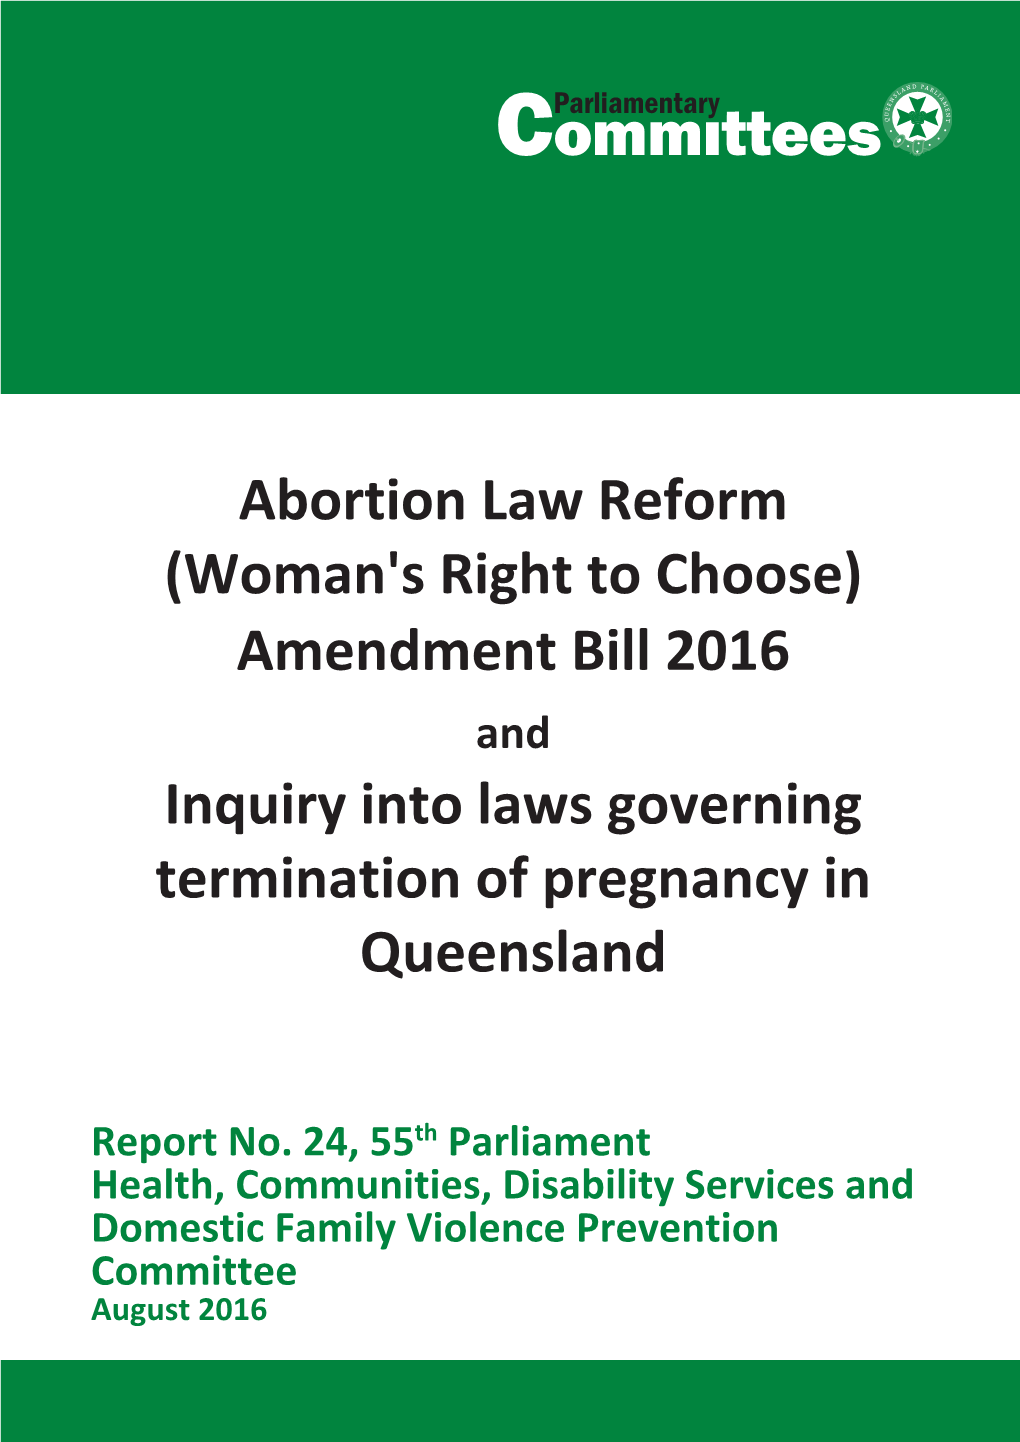 Abortion Law Reform (Woman's Right to Choose) Amendment Bill 2016 and Inquiry Into Laws Governing Termination of Pregnancy in Queensland